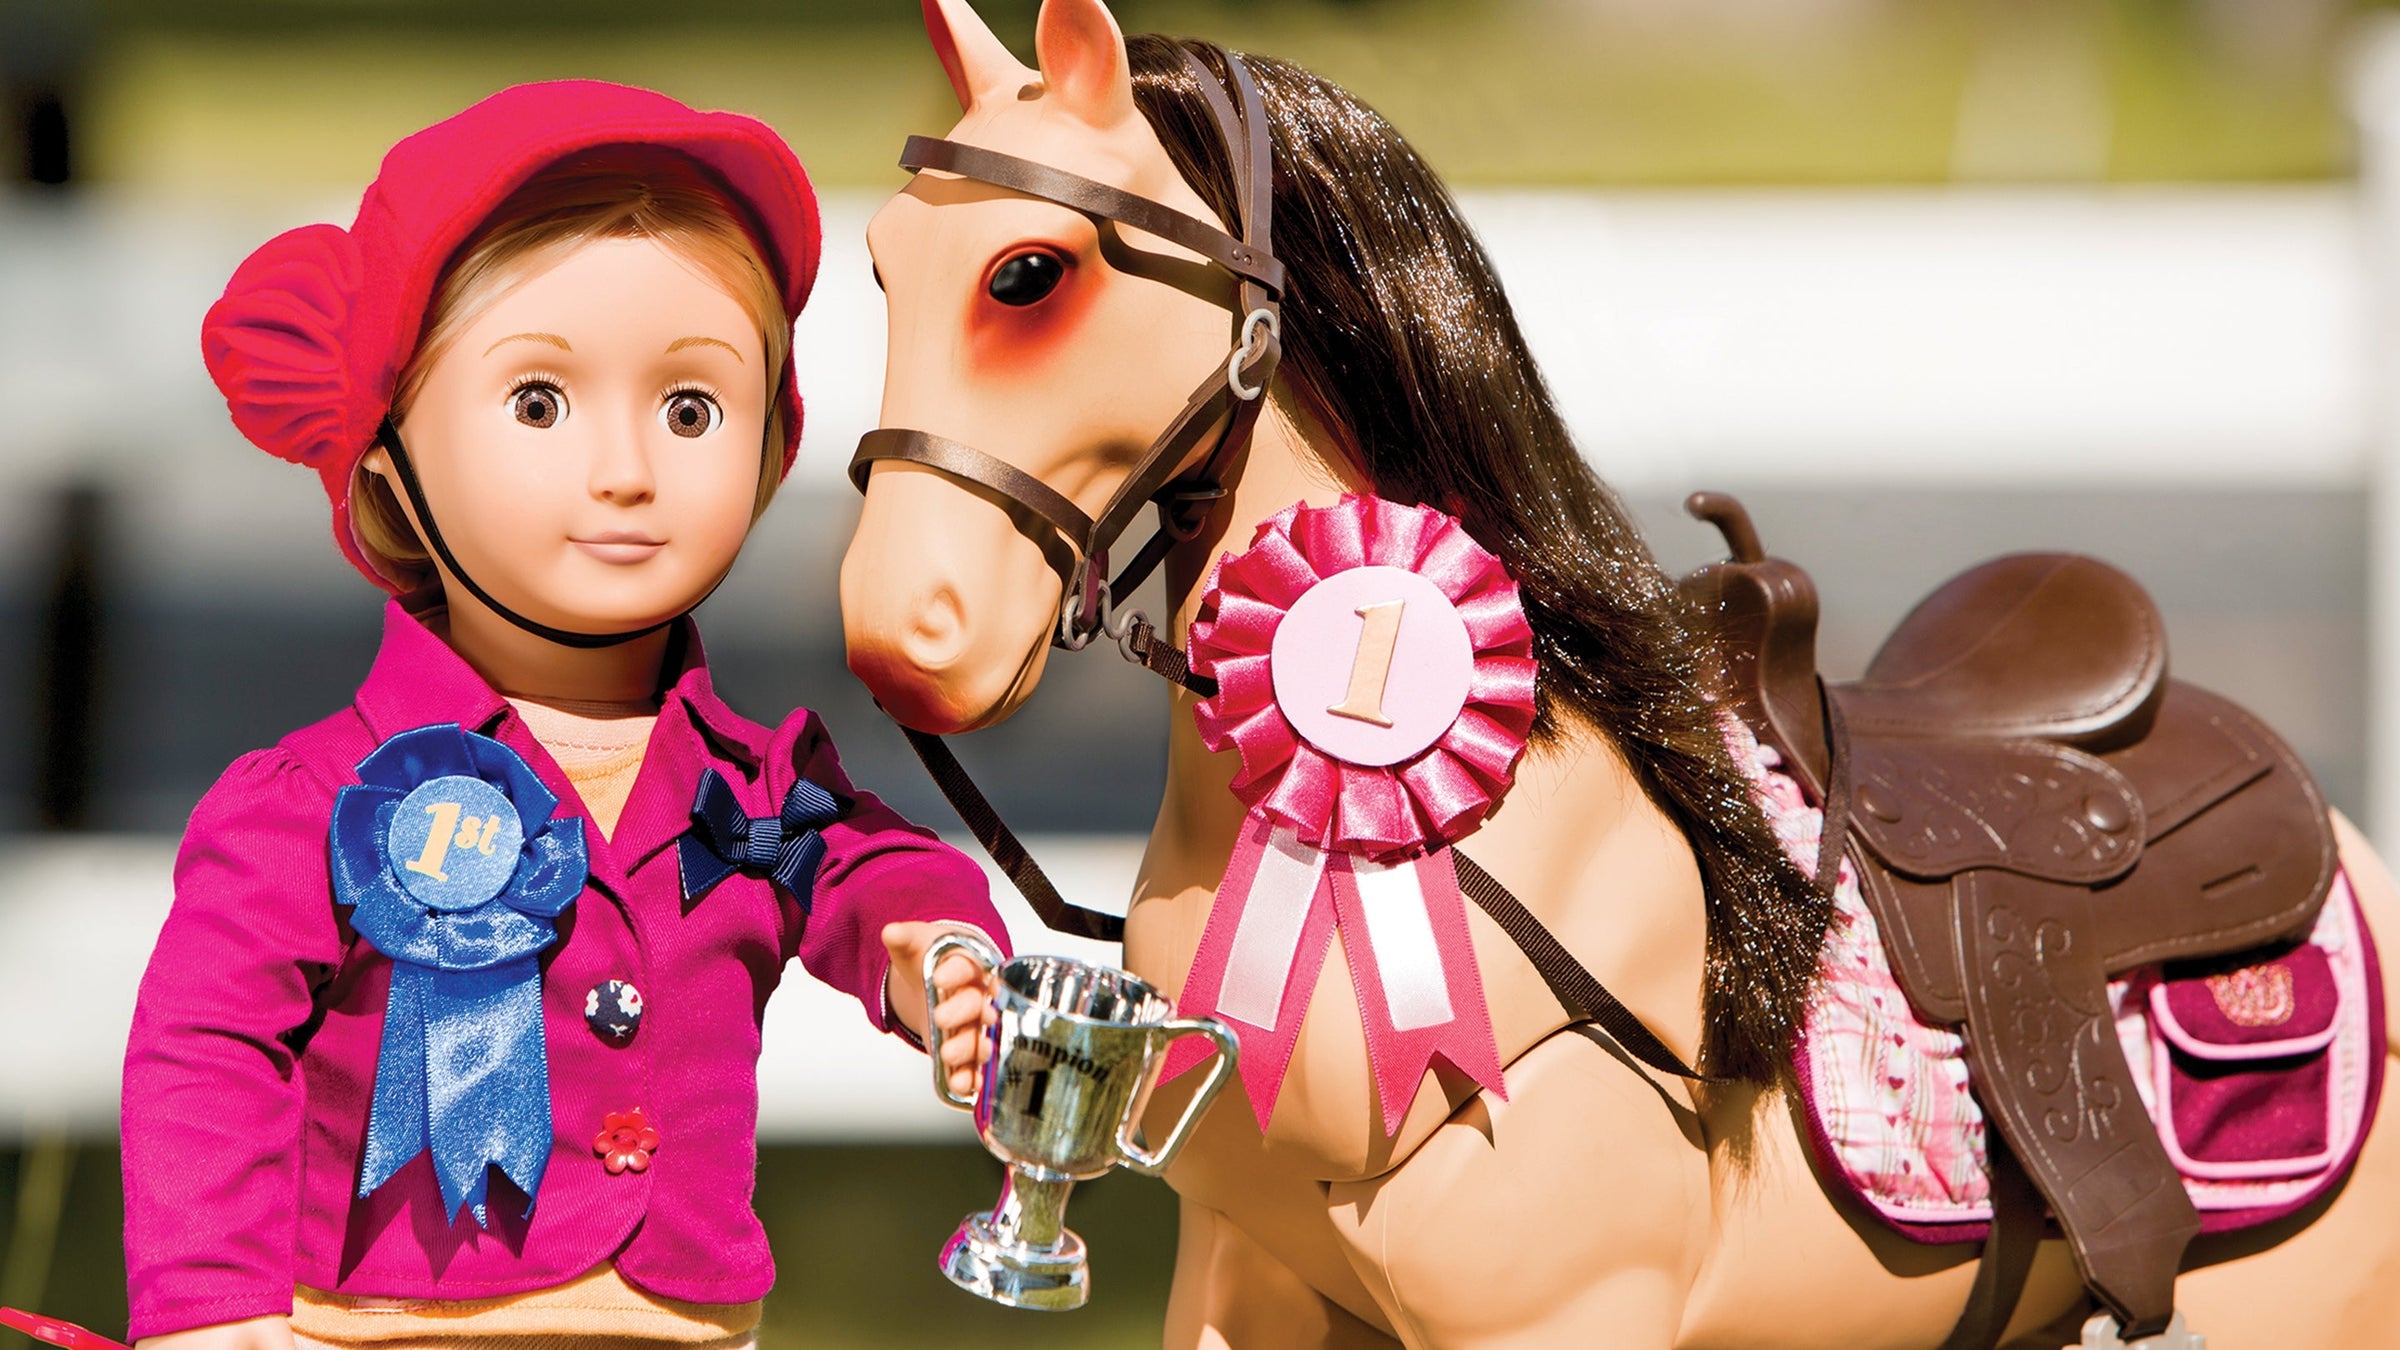 Loyal Pals - Pets & Horses for OG Dolls - Animal Accessories - Our Generation